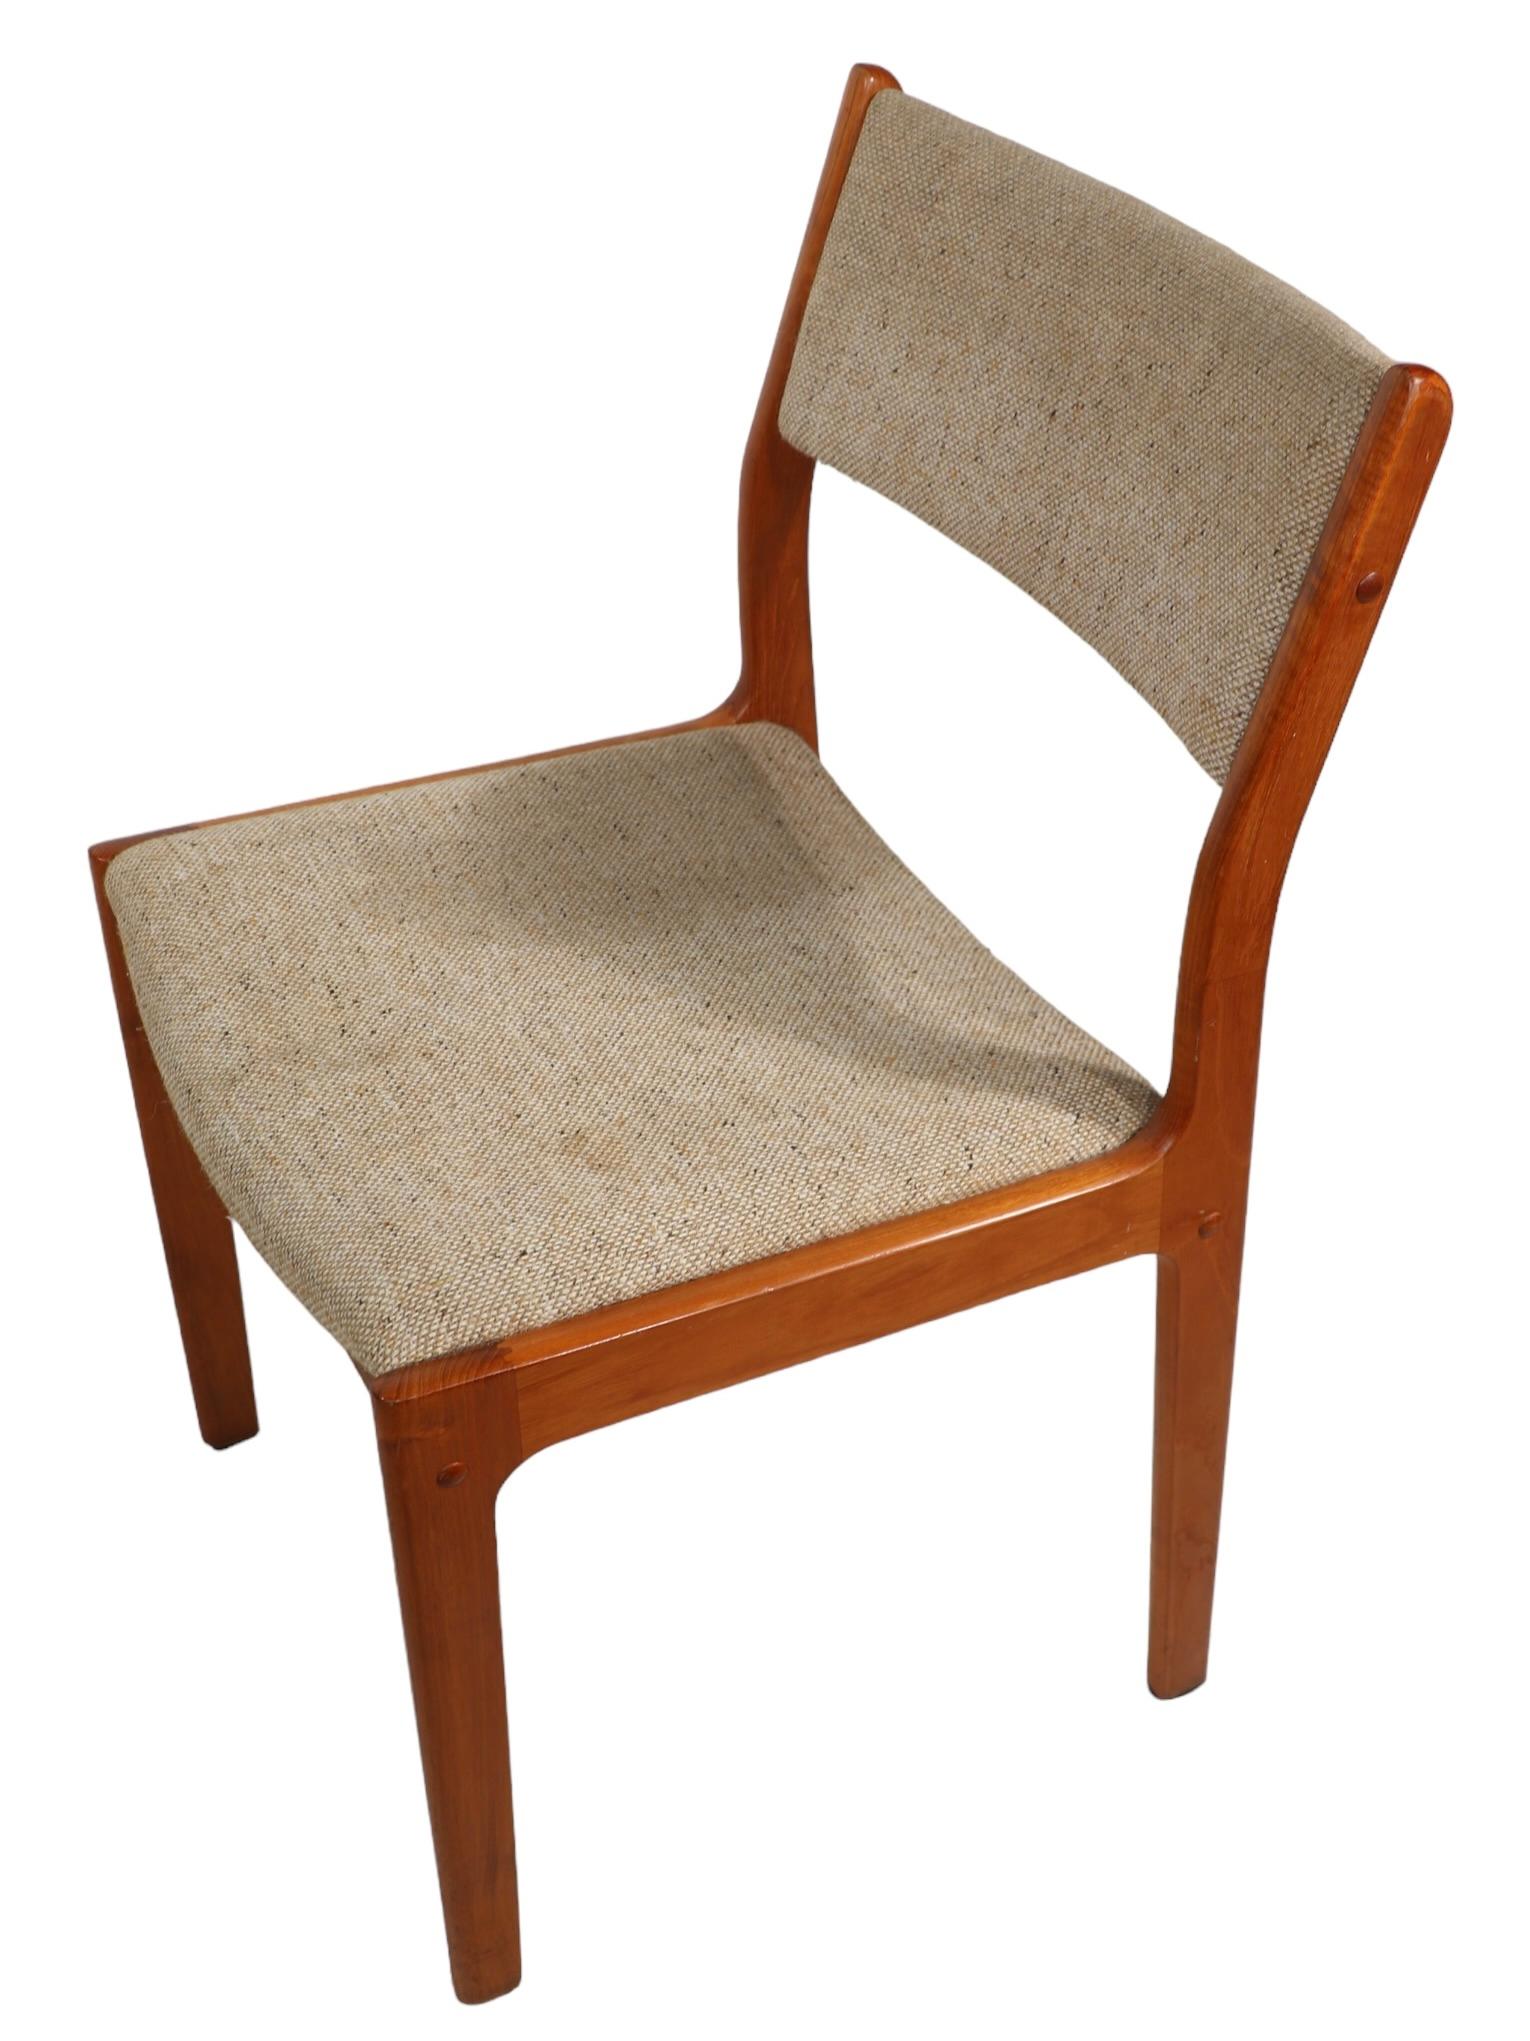 Four Teak  Danish Style Mid Century Dining Chairs by D Scan c 1950/1960's  For Sale 1